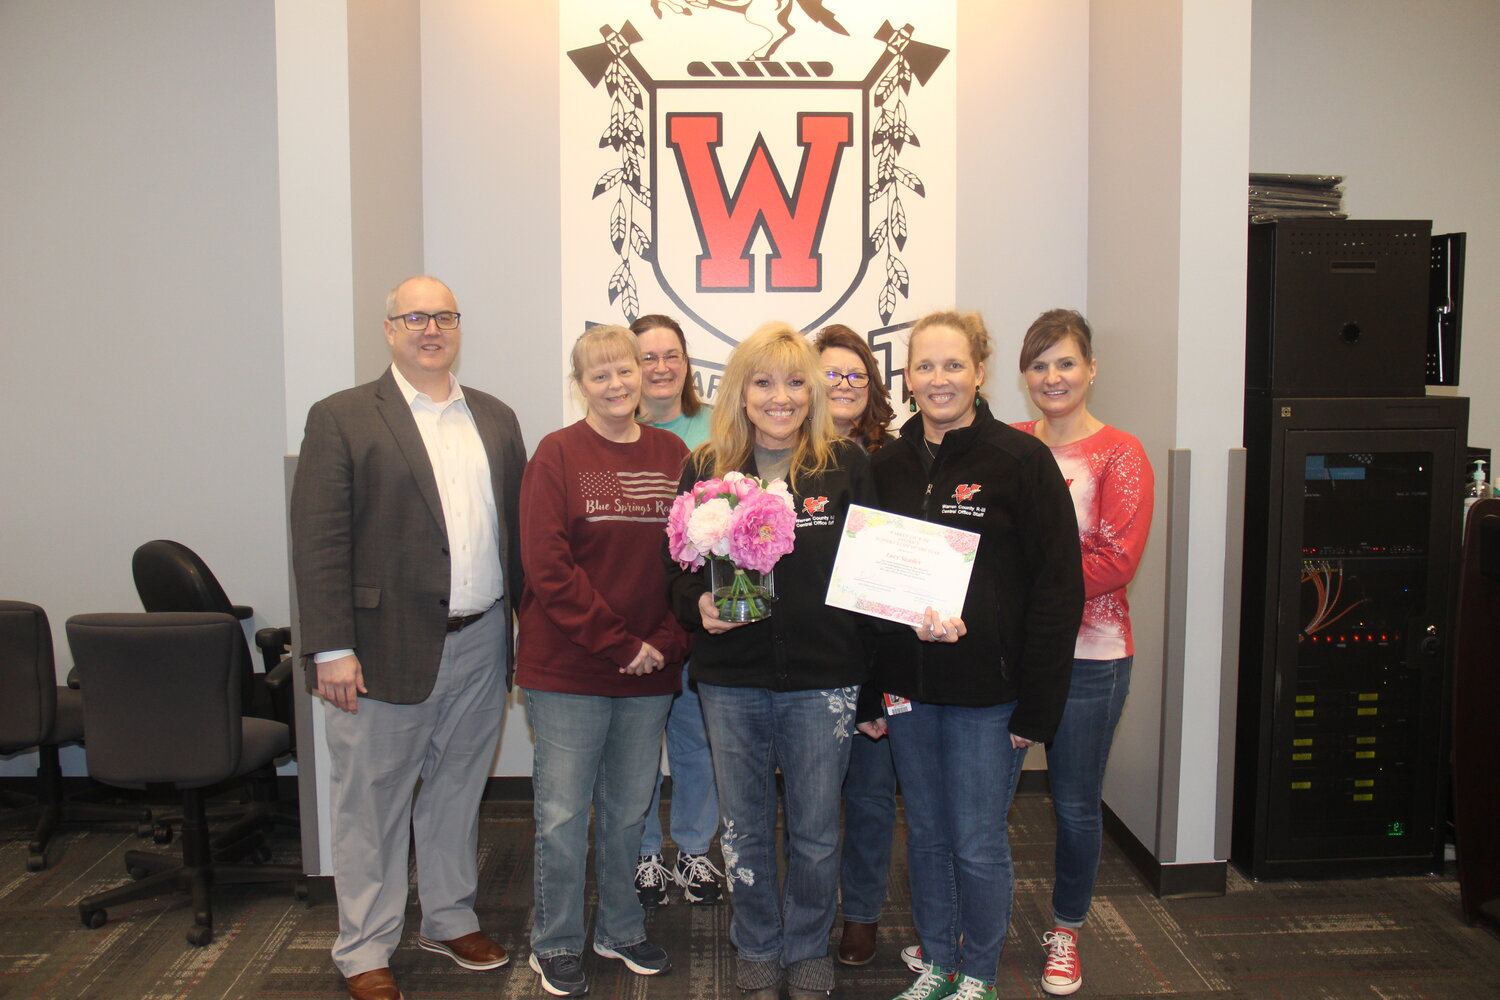 Lucy Swailes, center, is Warren County R-III School District’s Support Staff of the Year. Swailes is a staff member at the district’s Central Office, and was joined by her coworkers to congratulate her for the award. Pictured, from left, are Superintendent Gregg Klinginsmith and staff members Sherry Thompson, Kim Moeller, Swailes, Thea Etcher, Julie Corrigan and Becky Toebber. Not pictured: Carrie Strunk.